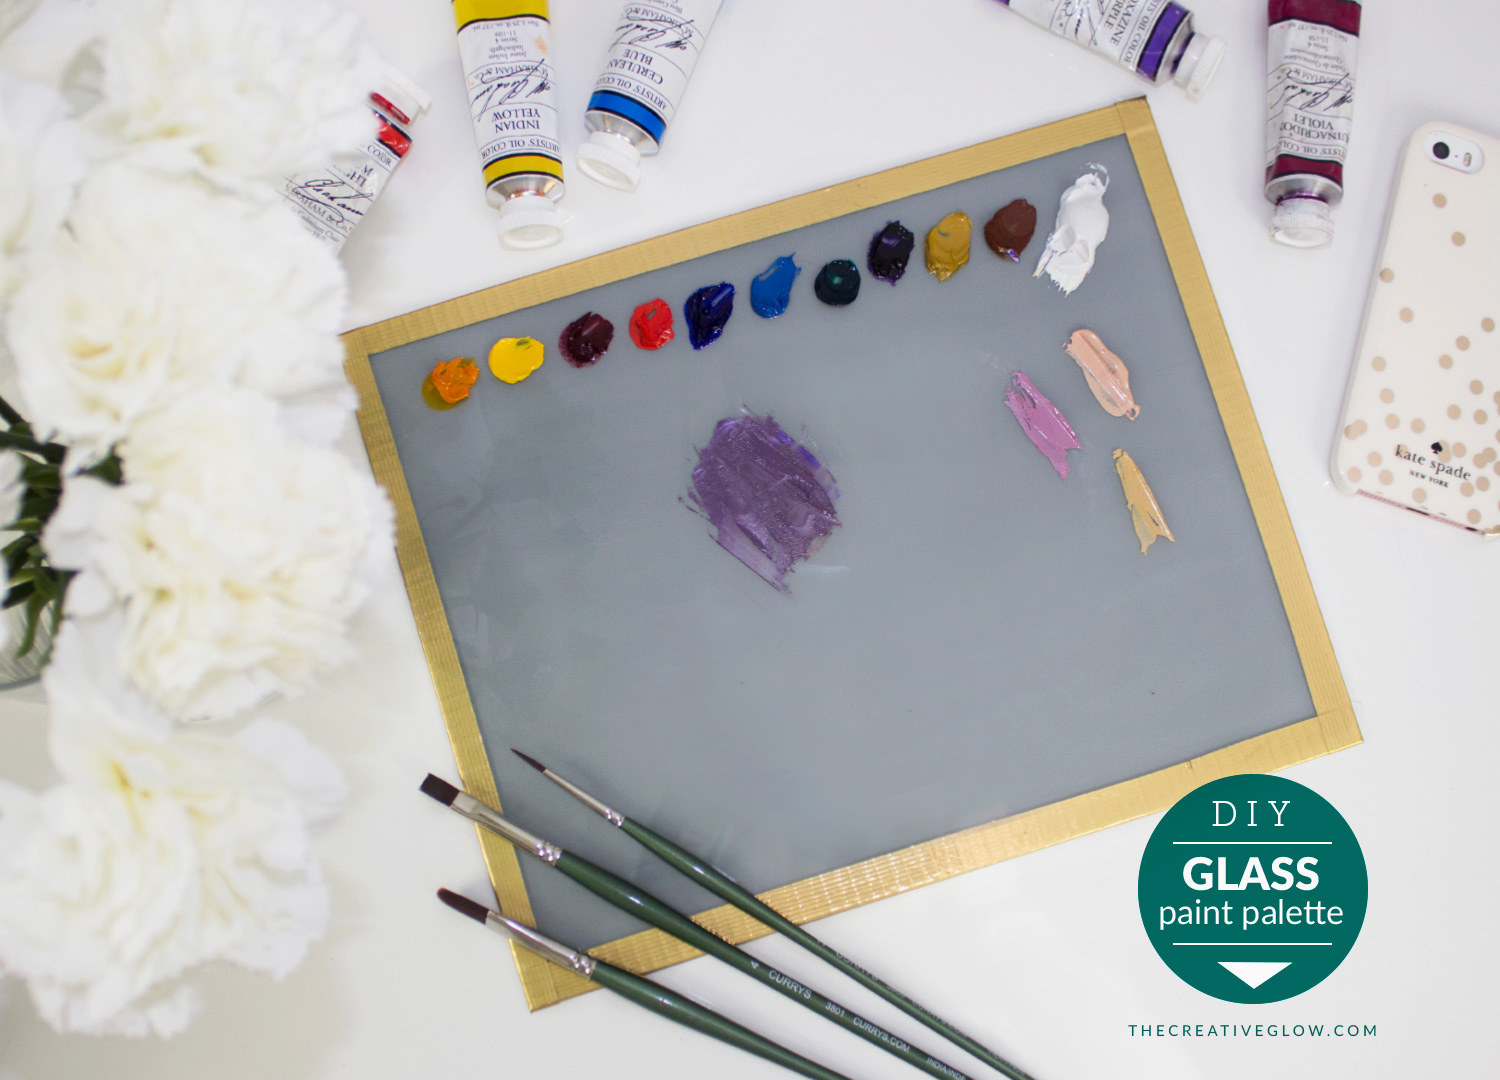 DIY Glass Paint Palette - Cheap & Easy as Heck! | Creative Glow: DIY Glass Palette - & Easy as